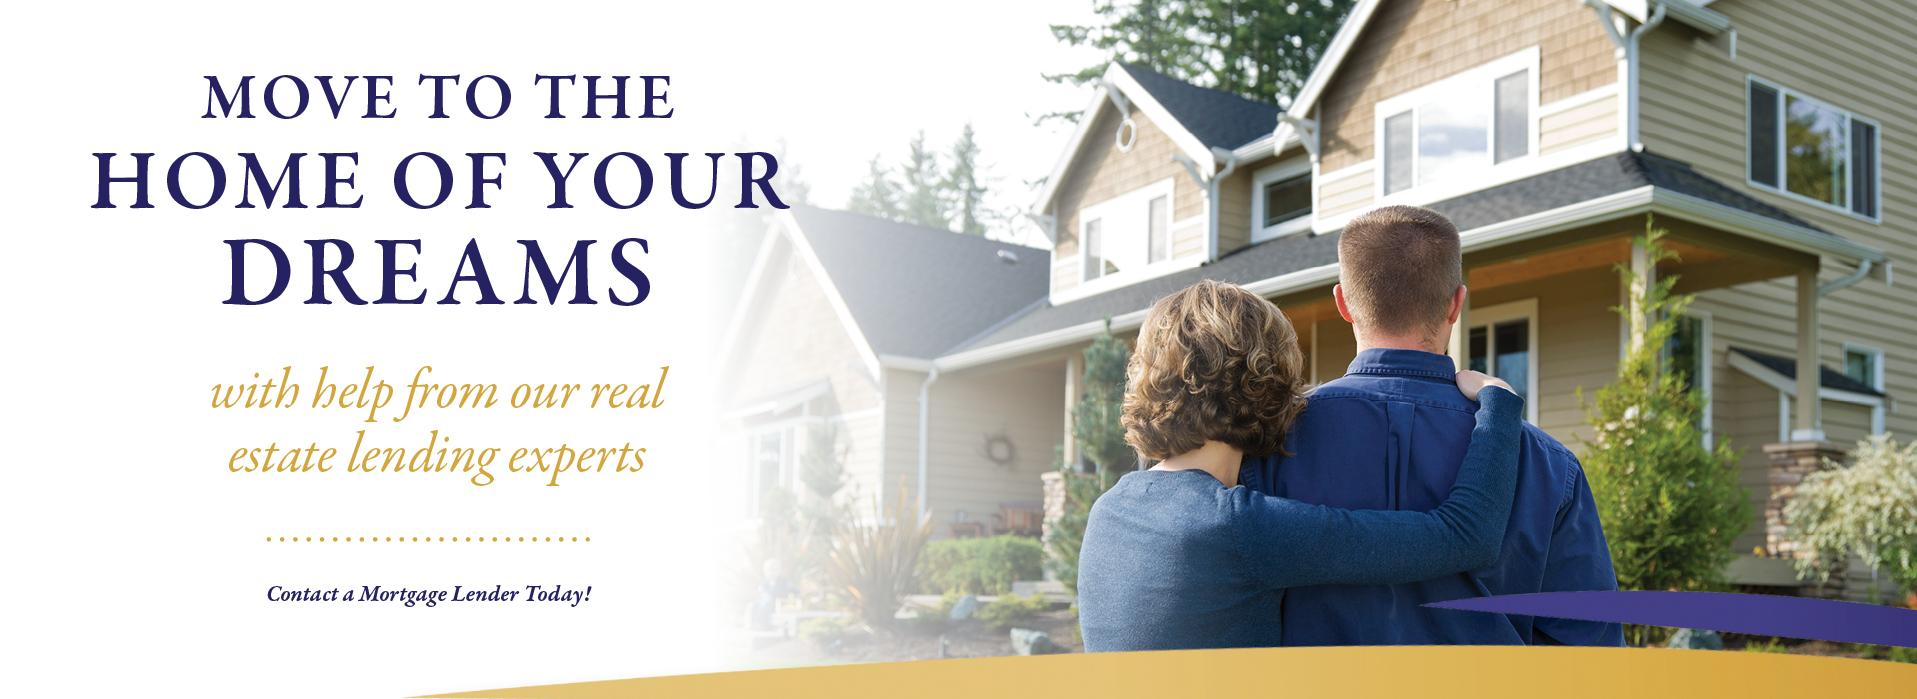 Move to the Home of your Dreams with help from our real estate lending experts.   Contact a Mortgage Lender today!  Image of a couple looking at a house.